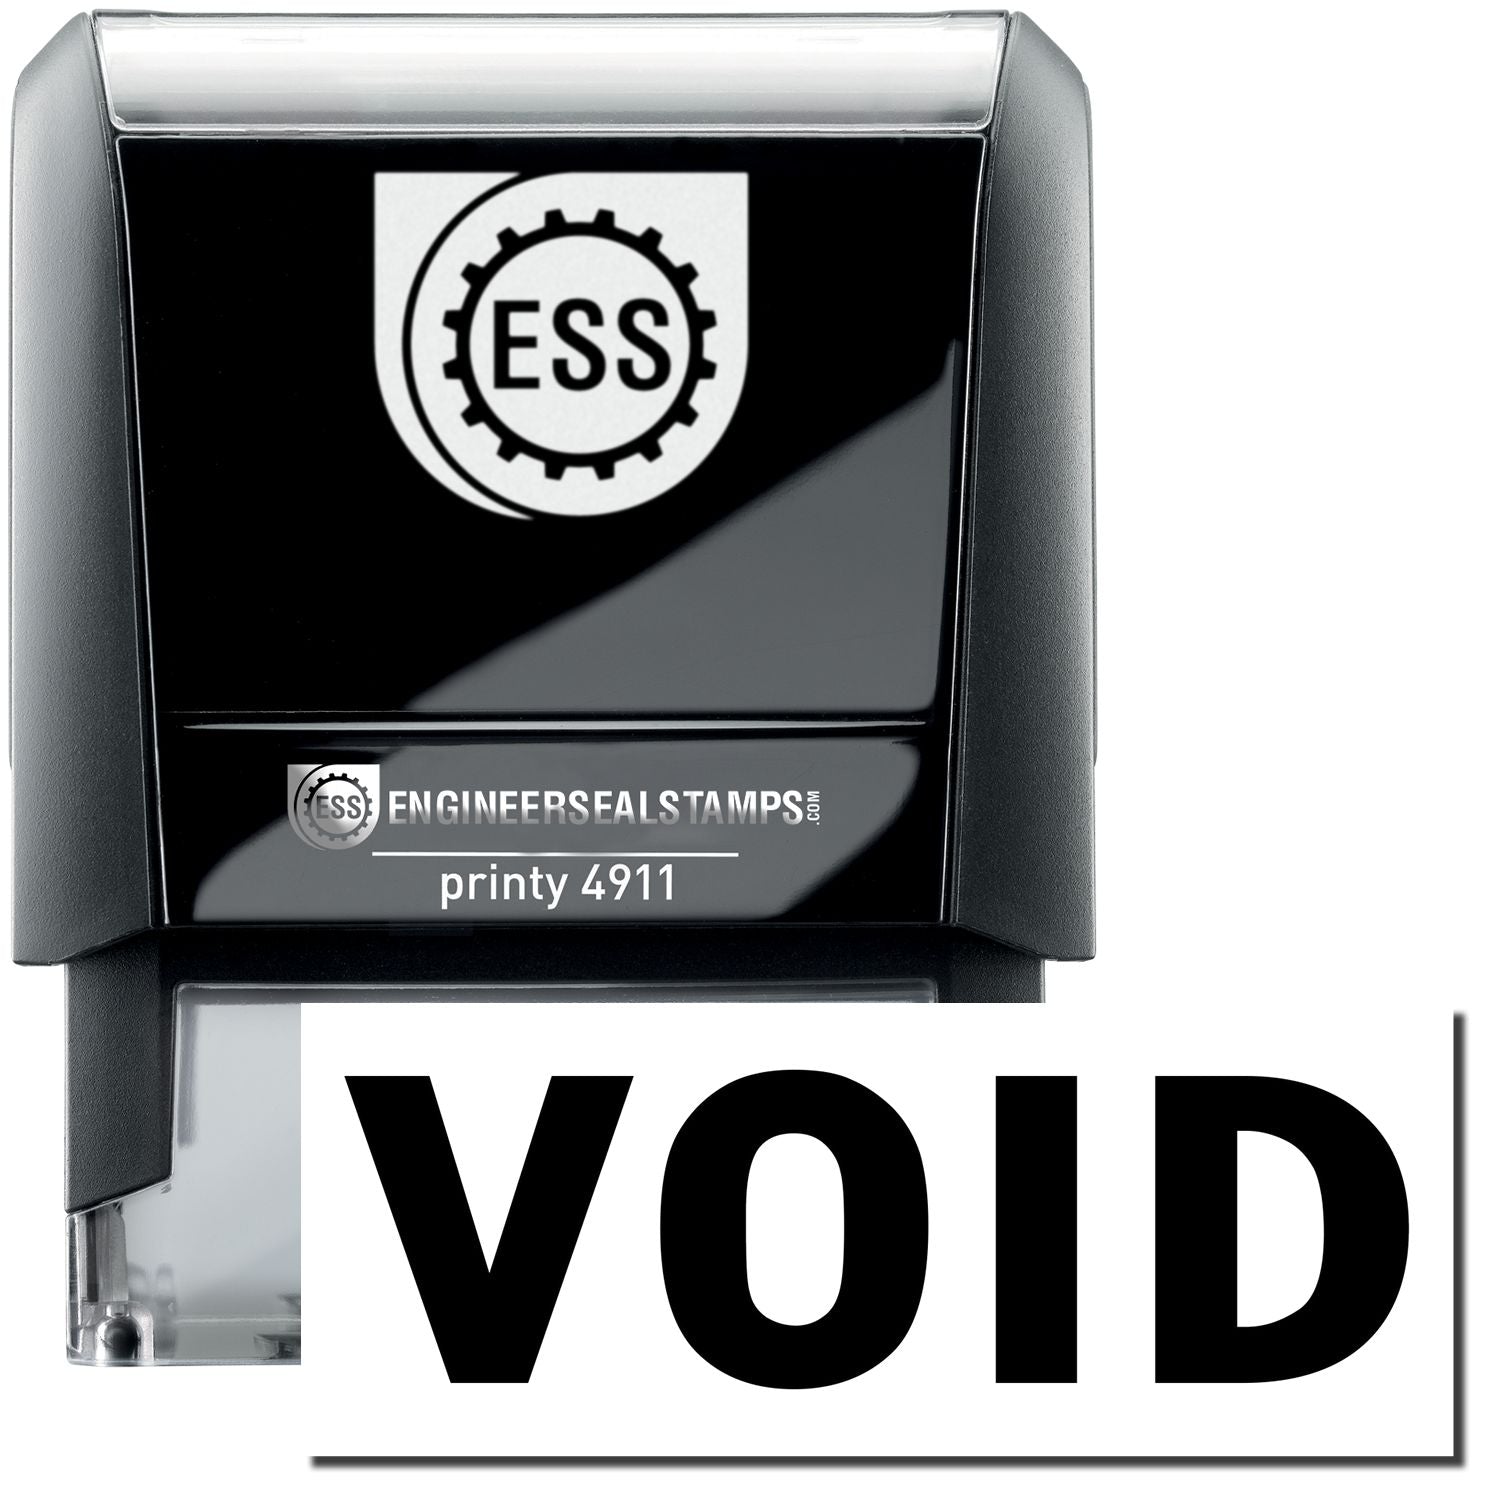 A self-inking stamp with a stamped image showing how the text "VOID" is displayed after stamping.